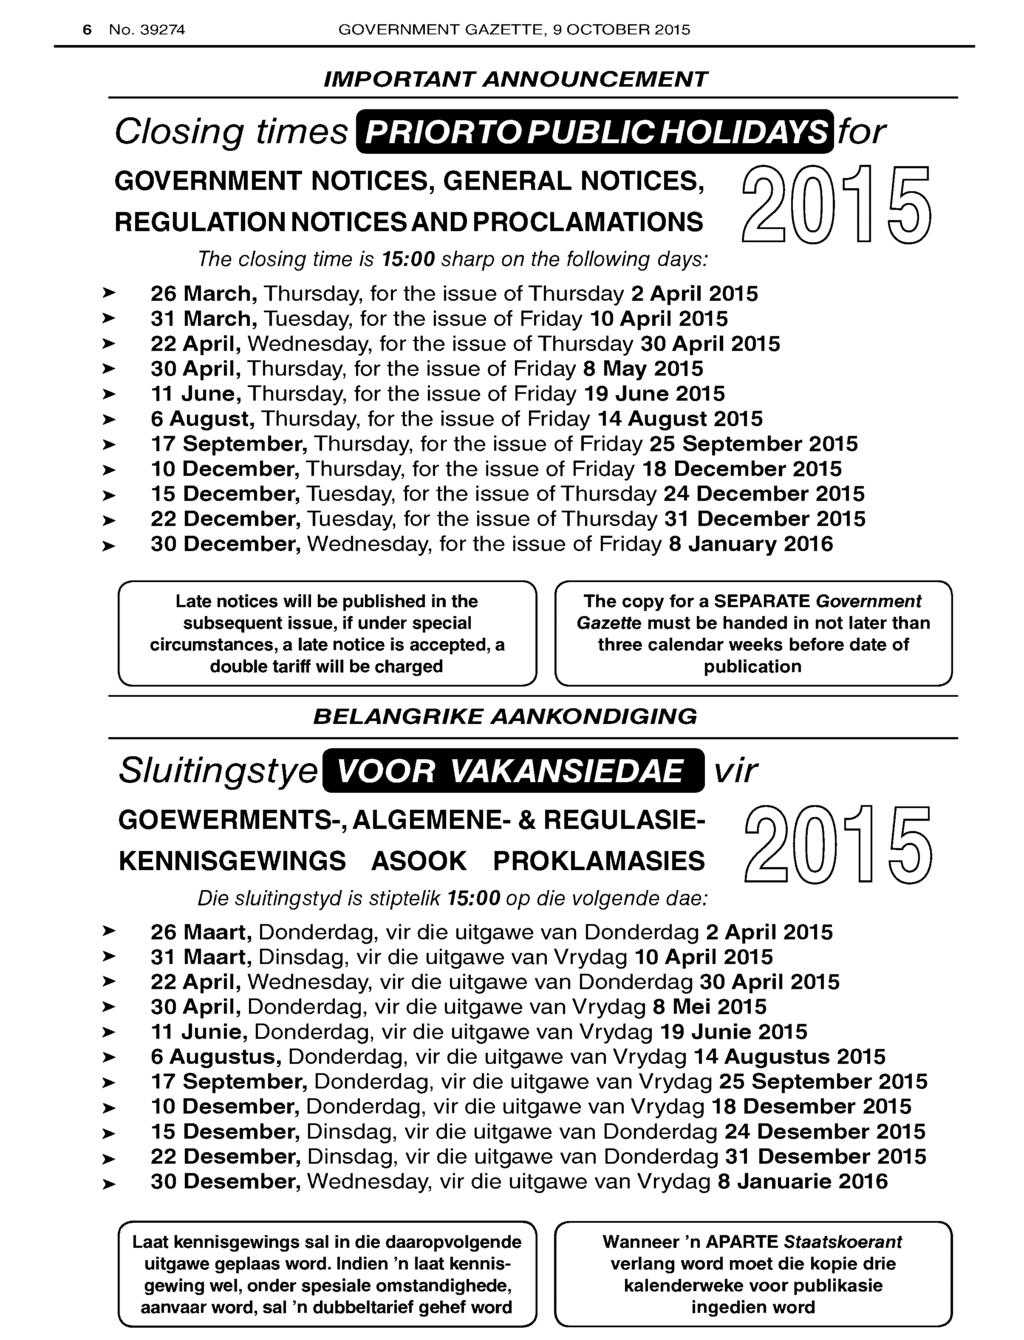 6 No. 39274 GOVERNMENT GAZETTE, 9 OCTOBER 2015 IMPORTANT ANNOUNCEMENT Closing times PRIOR TO PUBLIC HOLIDAYS GOVERNMENT NOTICES, GENERAL NOTICES, REGULATION NOTICESAND PROCLAMATIONS The closing time